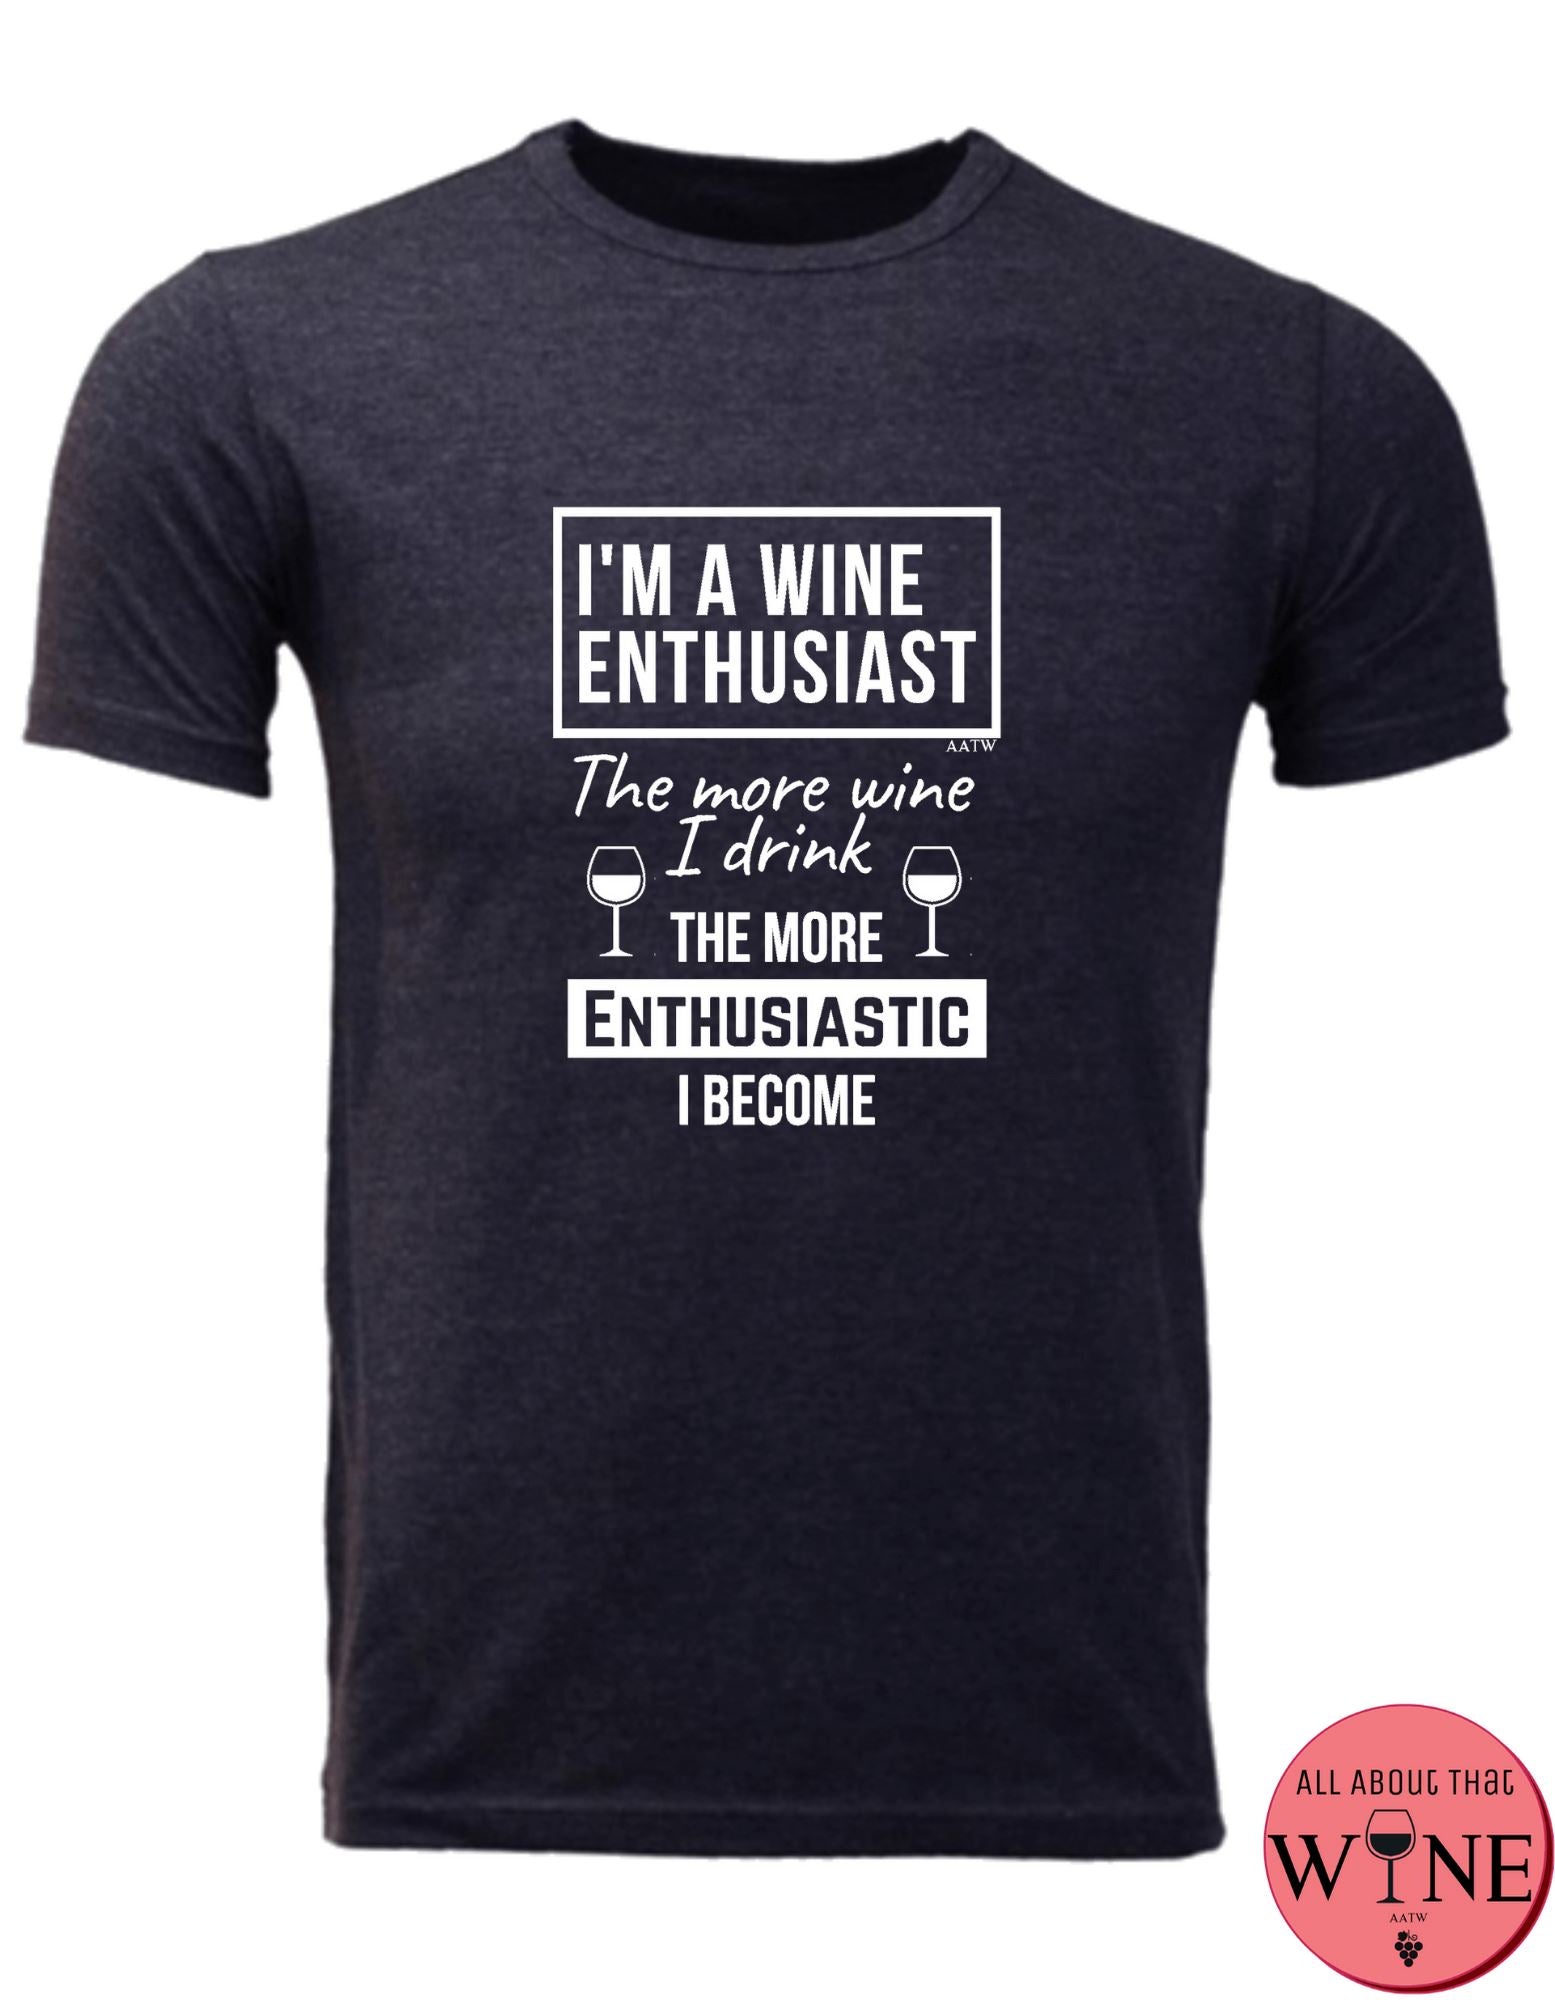 I'm A Wine Enthusiast - Men's T-shirt S Charcoal melange with white